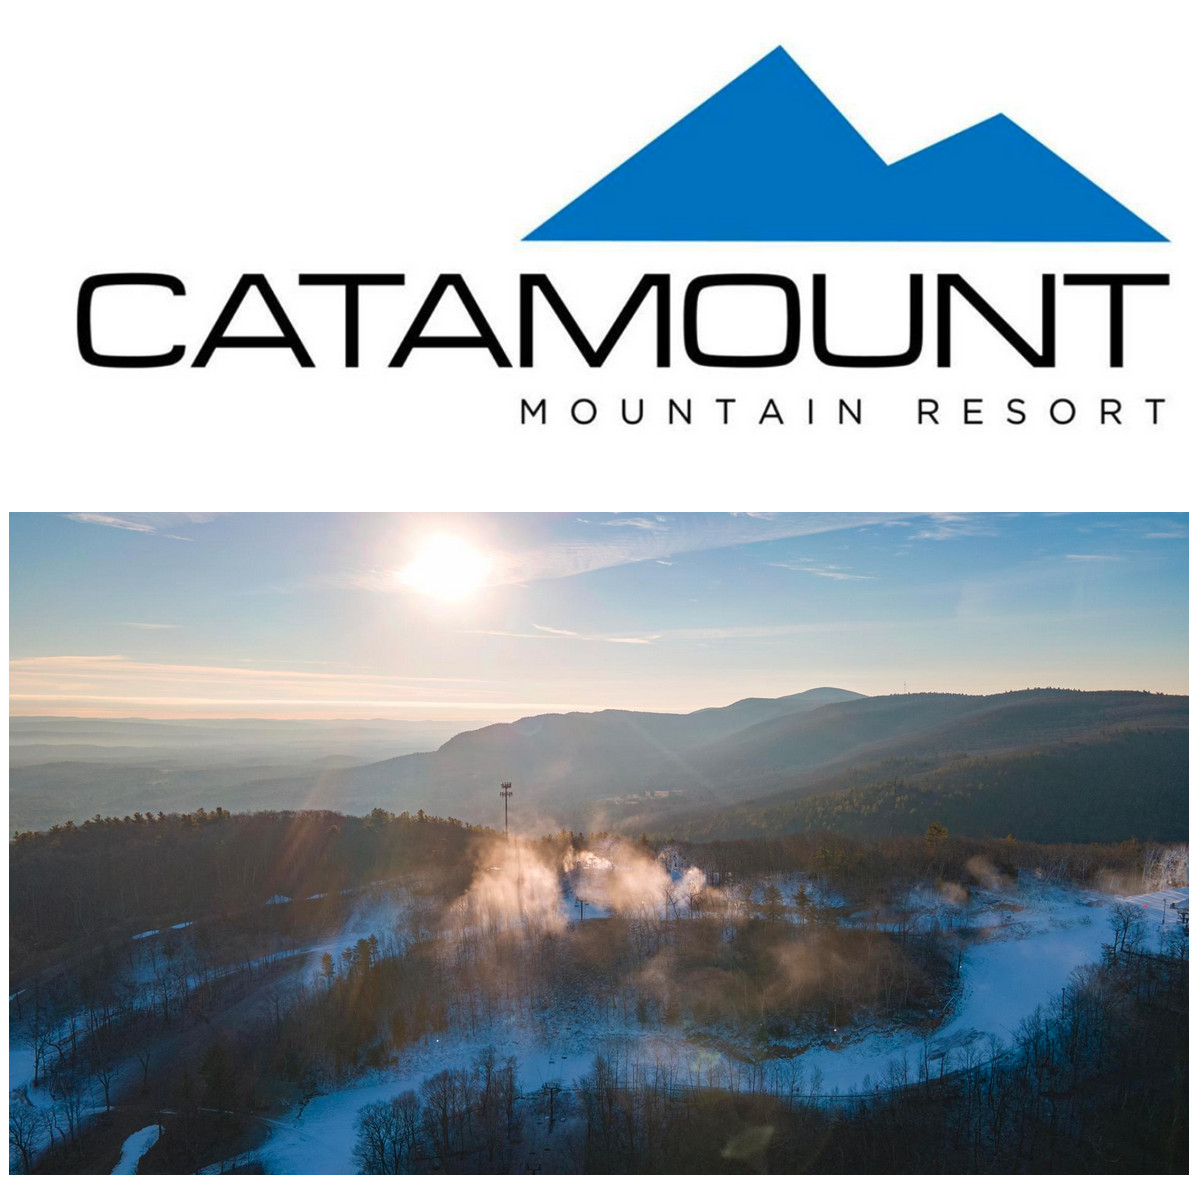 Catamount logo and view of slopes